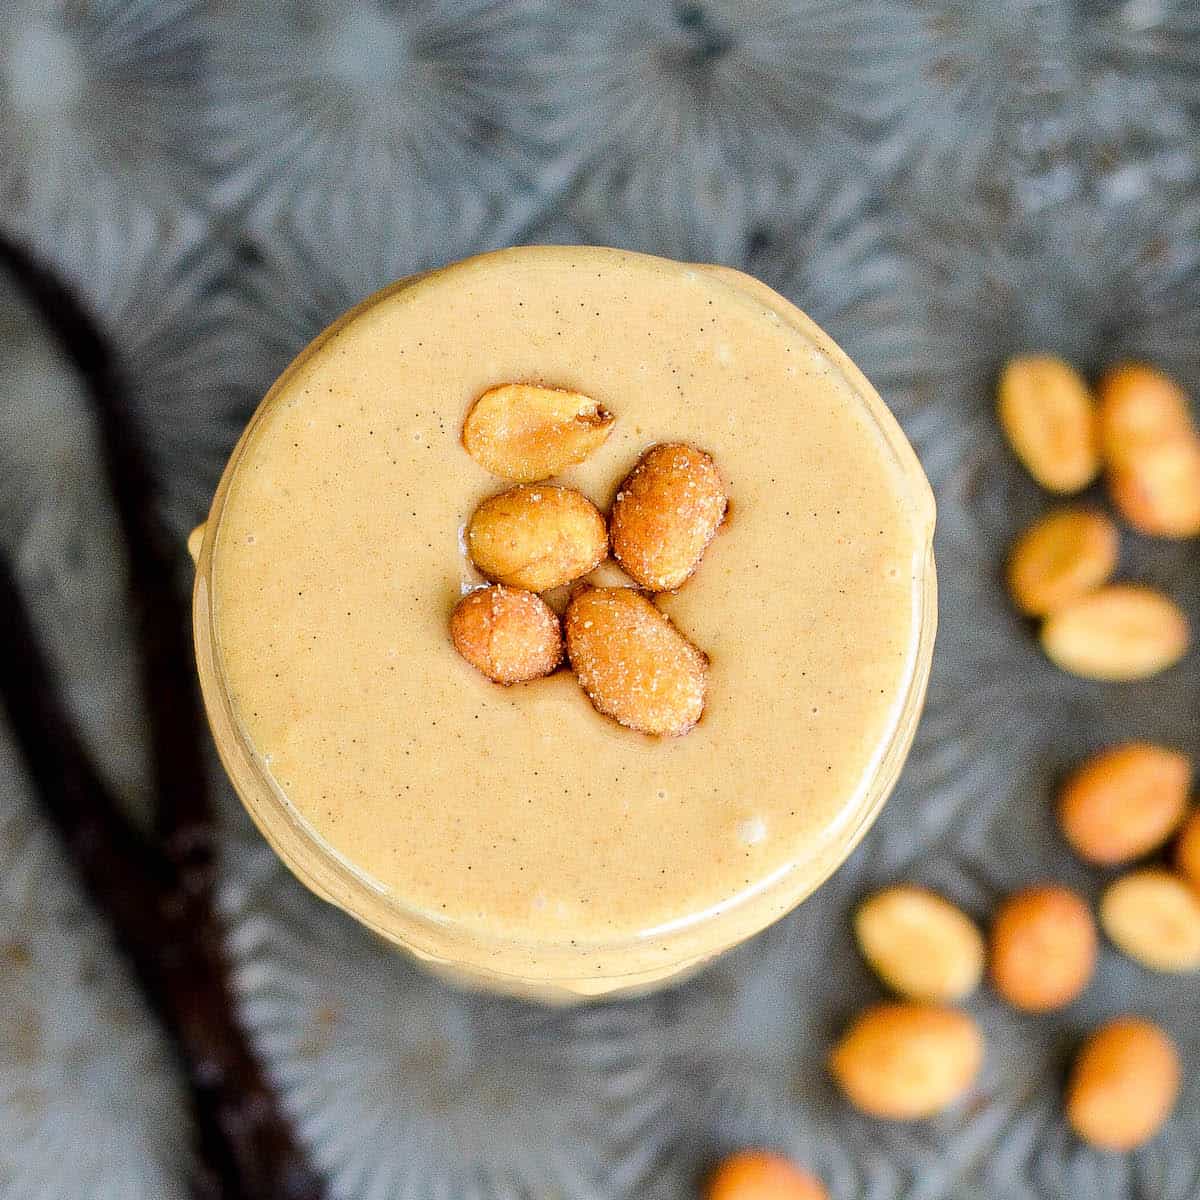 Overhead view of a jar of Peanut Butter topped with roasted peanuts.